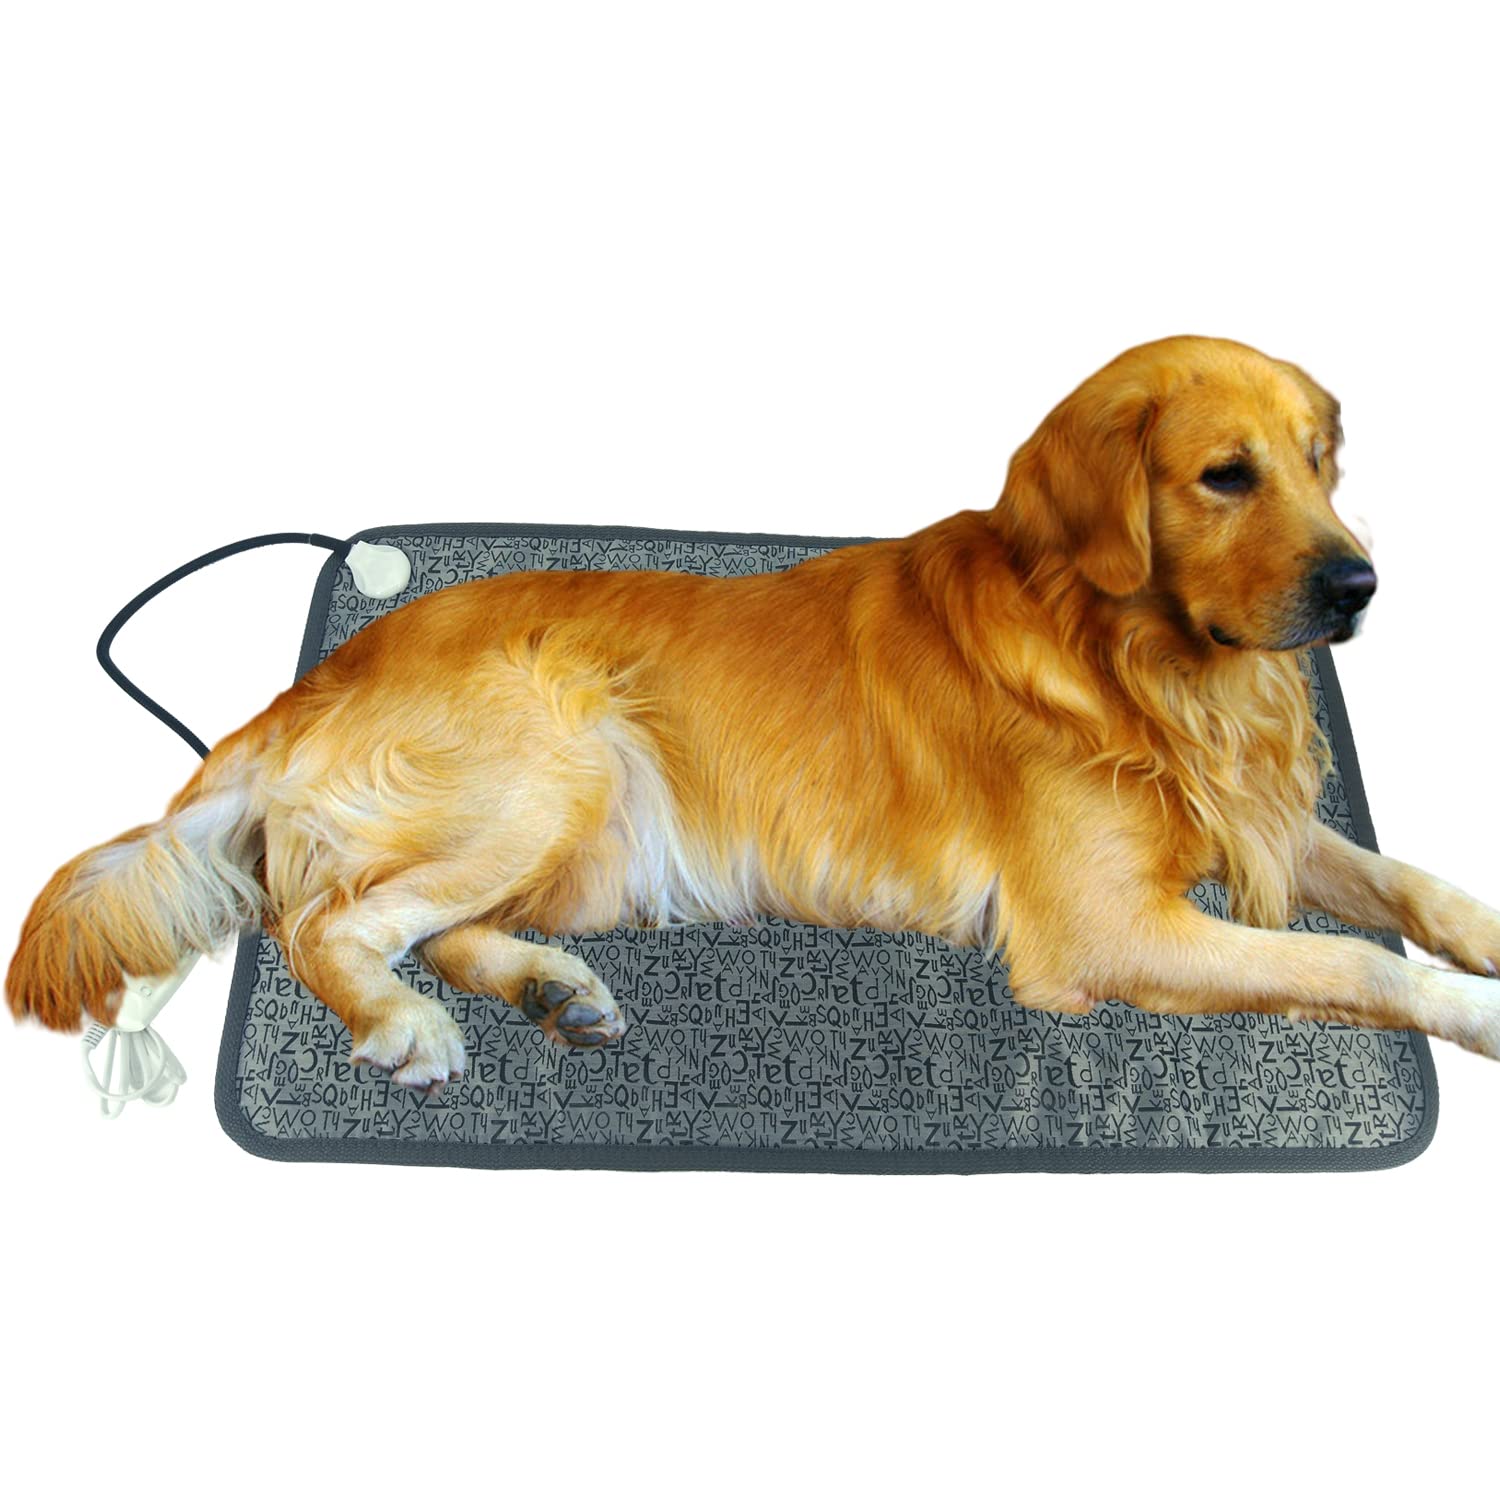 DEOMAN Pet Heating Pad for Dogs cats Heated Bed mat Indoor Electric Dog Heating pad cat Heating pad chew Proof cordLarge SizeEas